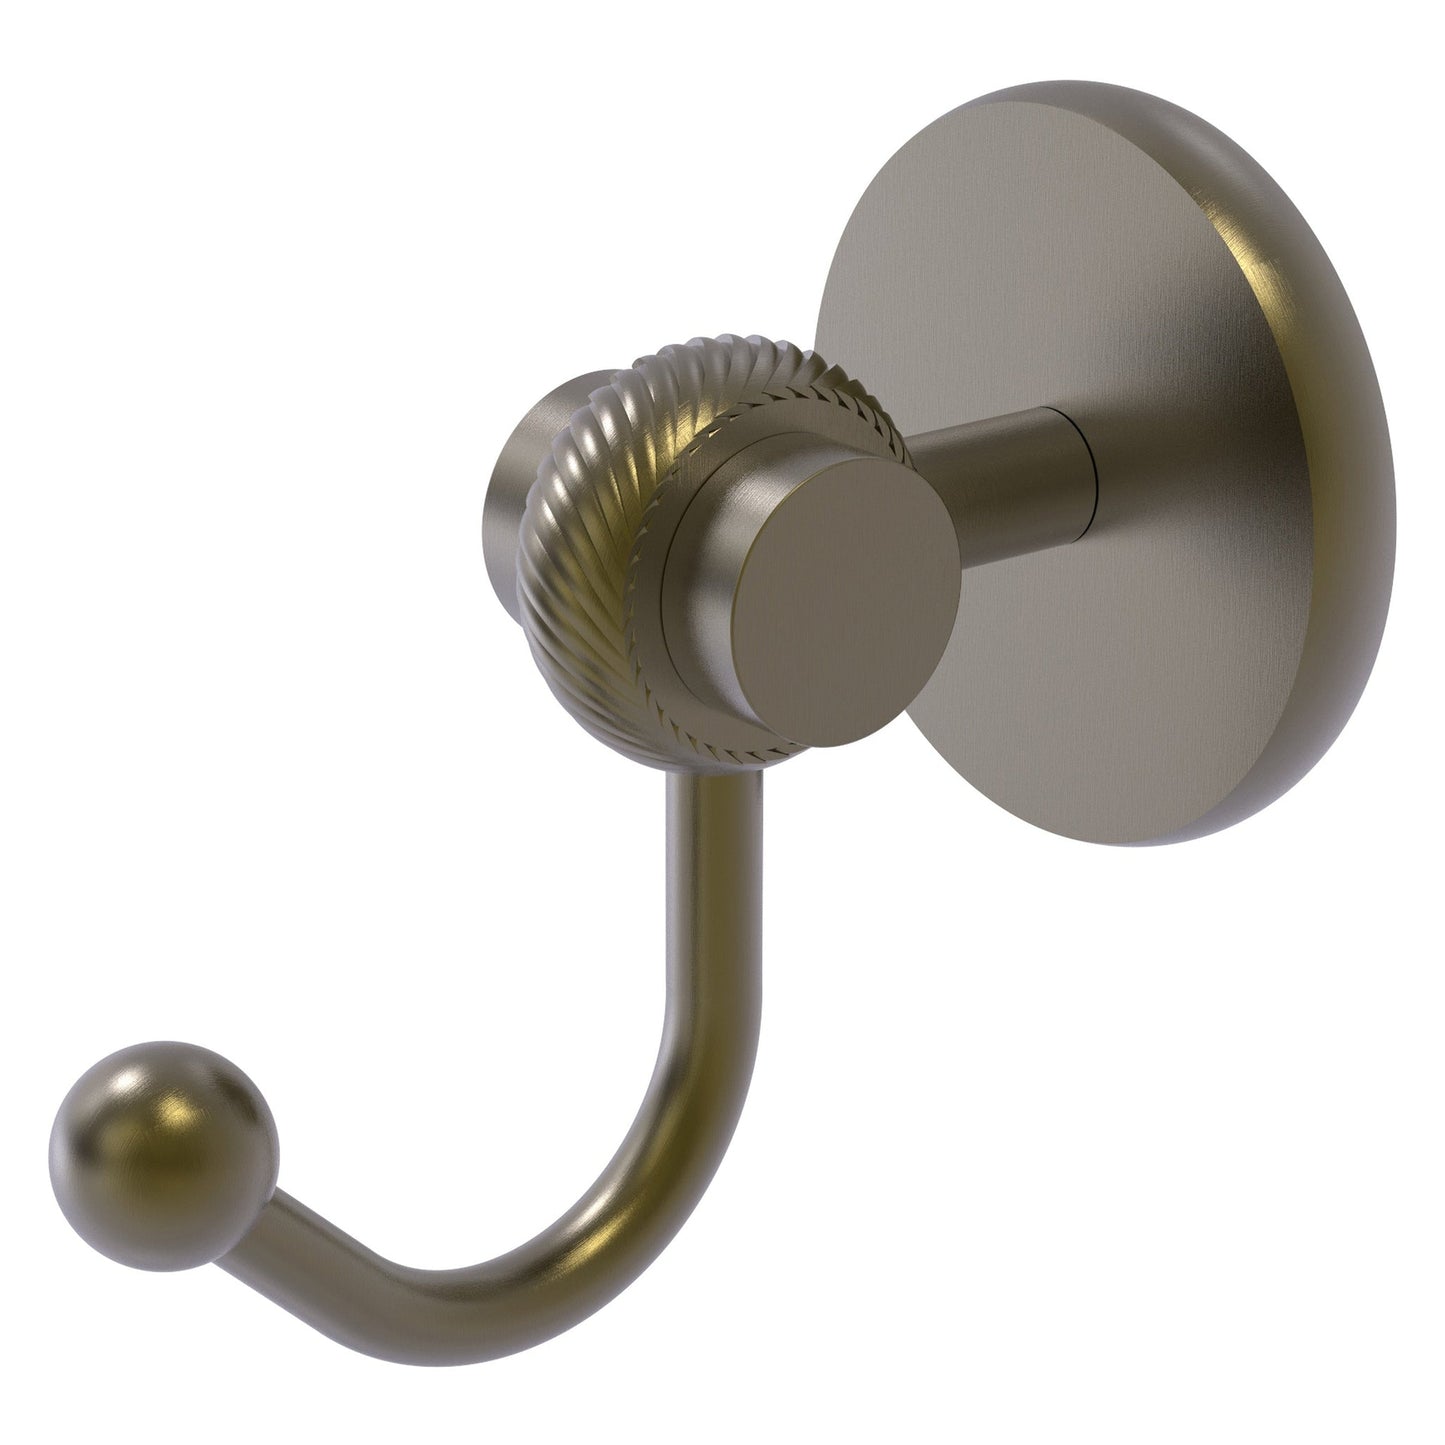 Allied Brass Satellite Orbit Two 2.77" x 4.54" Antique Brass Solid Brass Robe Hook With Twisted Accents